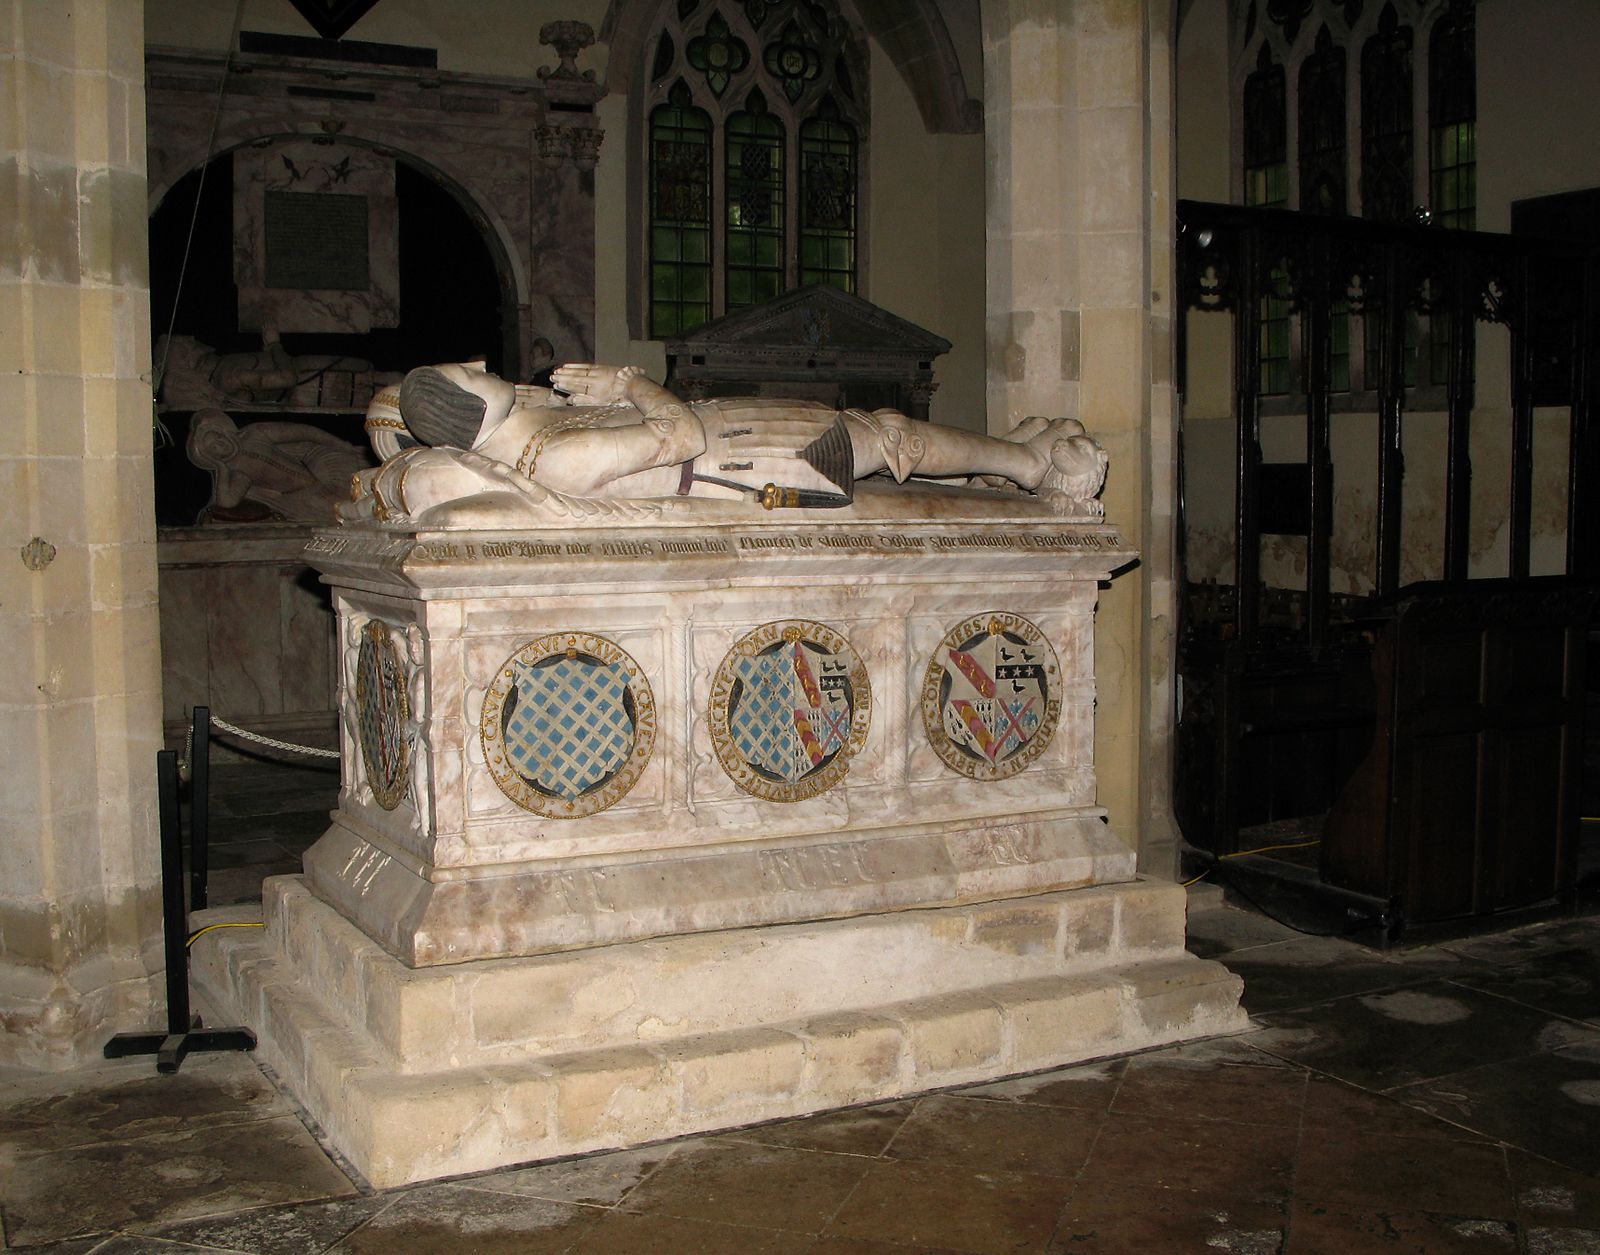 1558 - Memorial of Sir Thomas Cave and Elizabeth cave d.1558